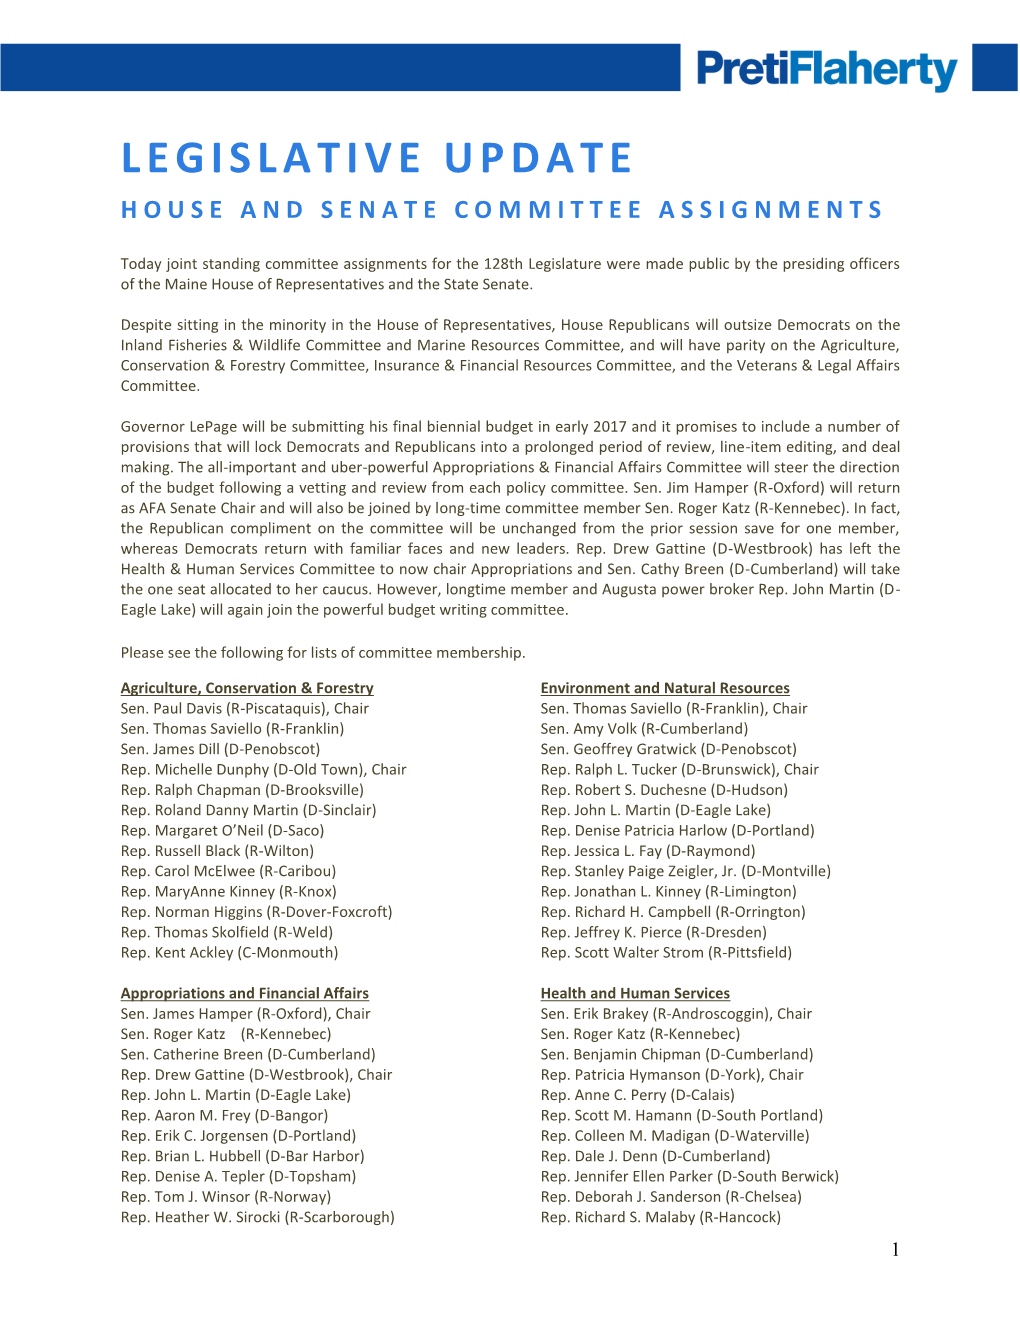 Legislative Update House and Senate Committee Assignments